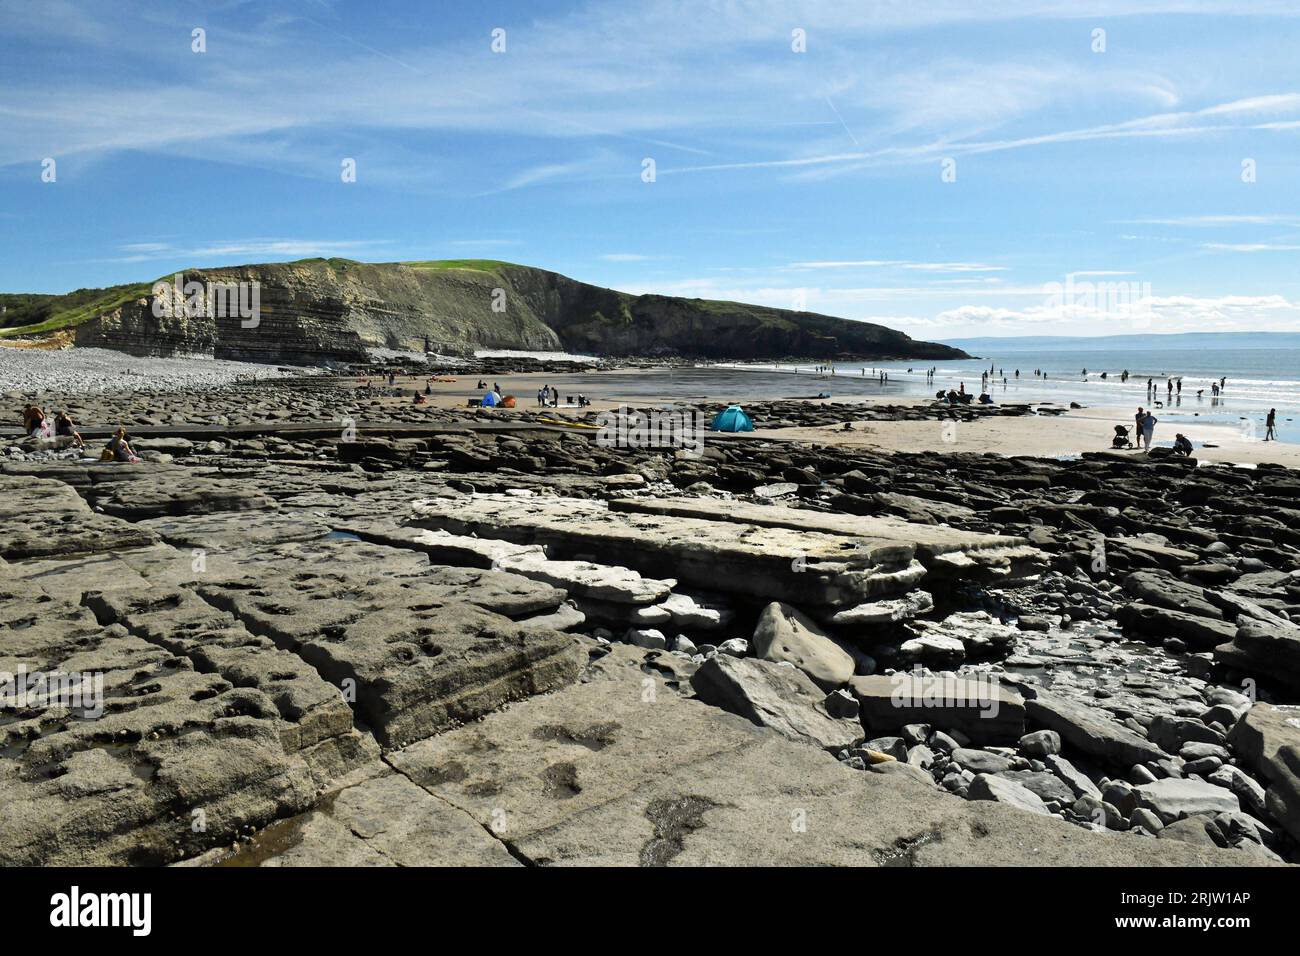 Eye Level view across Dunraven Bay showing rock slabs, Witches Nose, the Beach, the Sea and beach people  - in the Glamorgan Heritage Coast Area Stock Photo